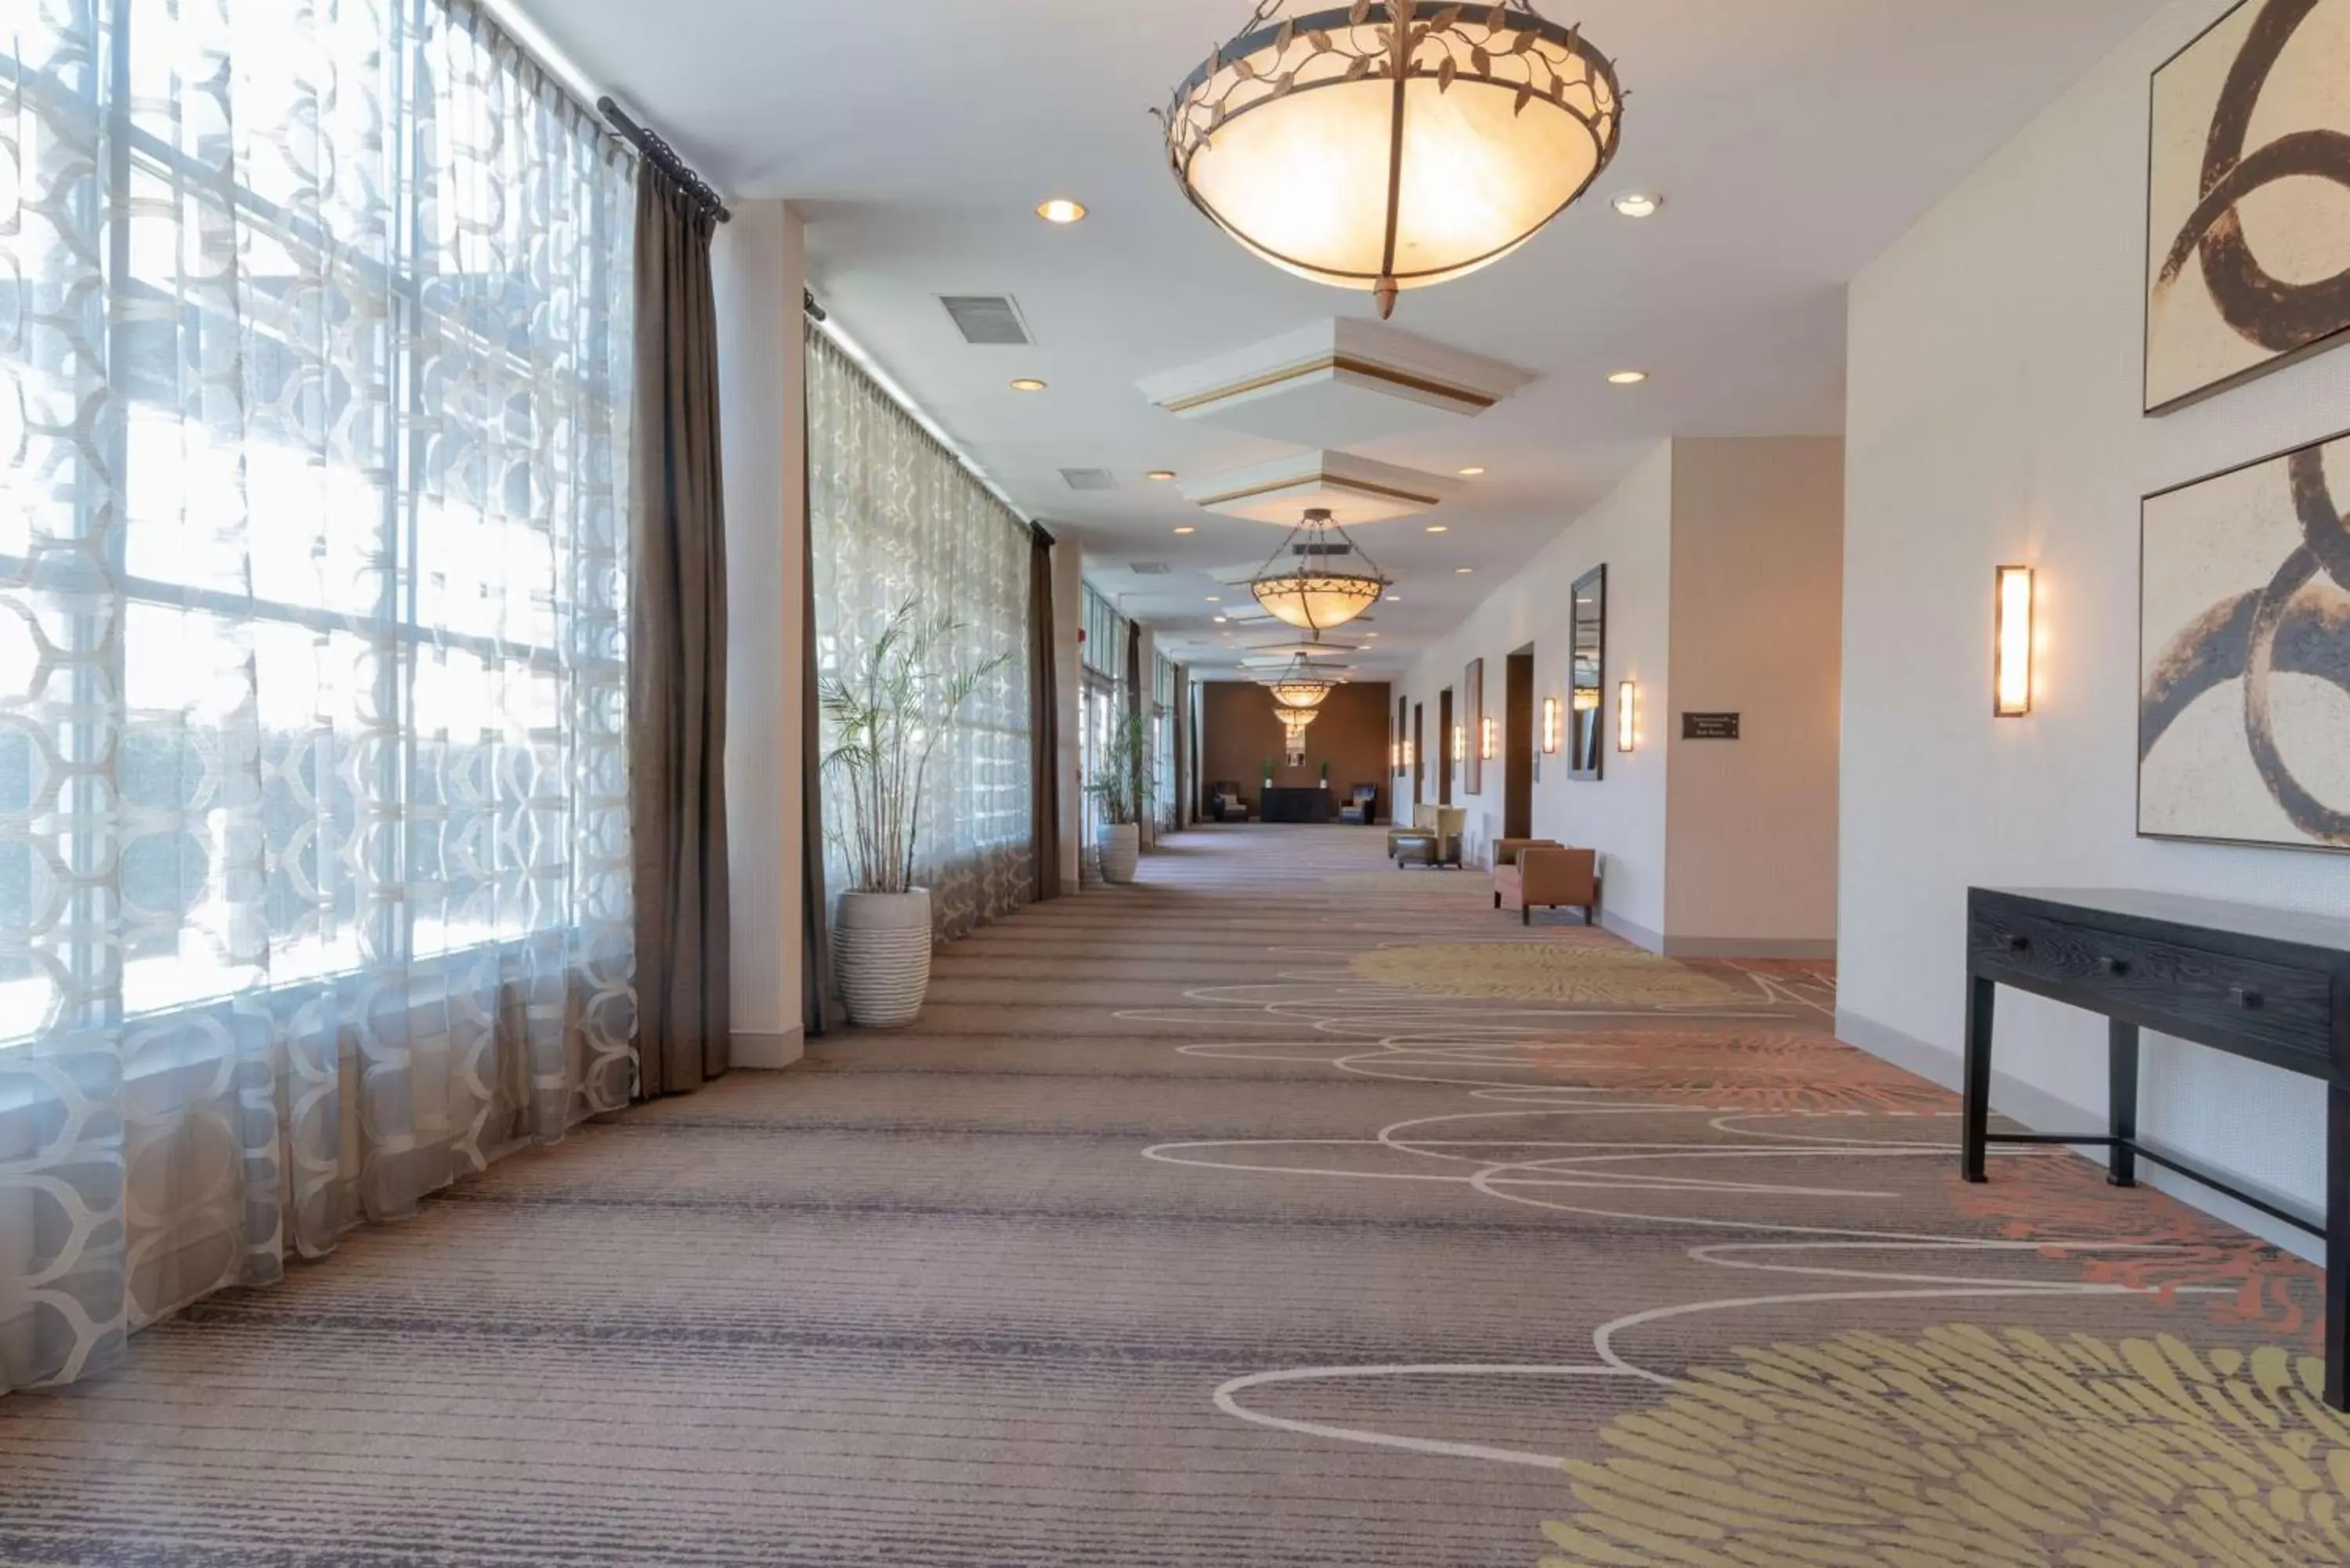 Meeting/conference room in DoubleTree by Hilton Norfolk Airport